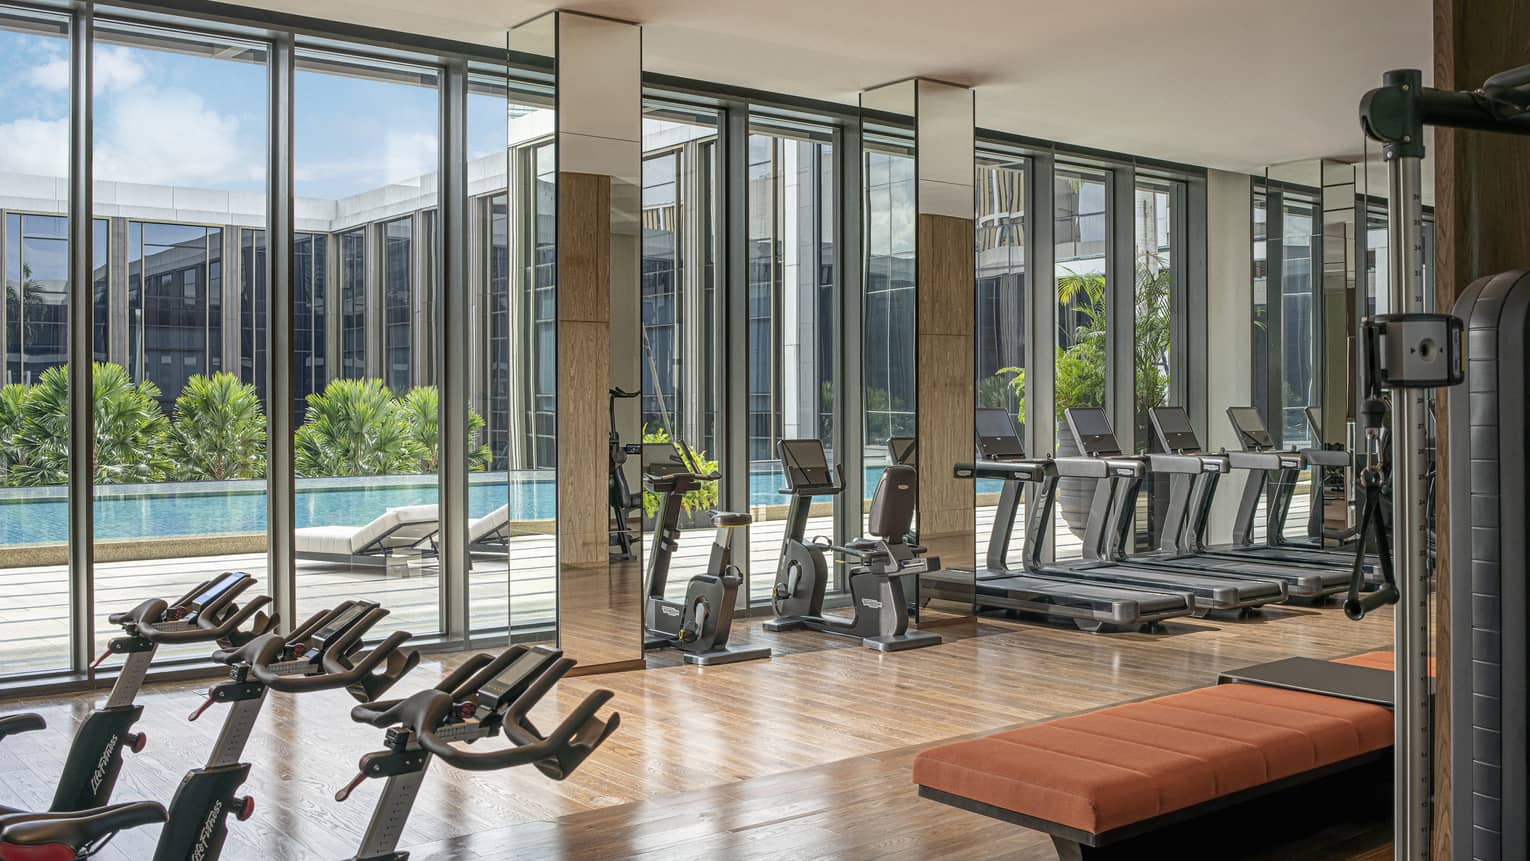 a room with exercise equipment and a pool in the background